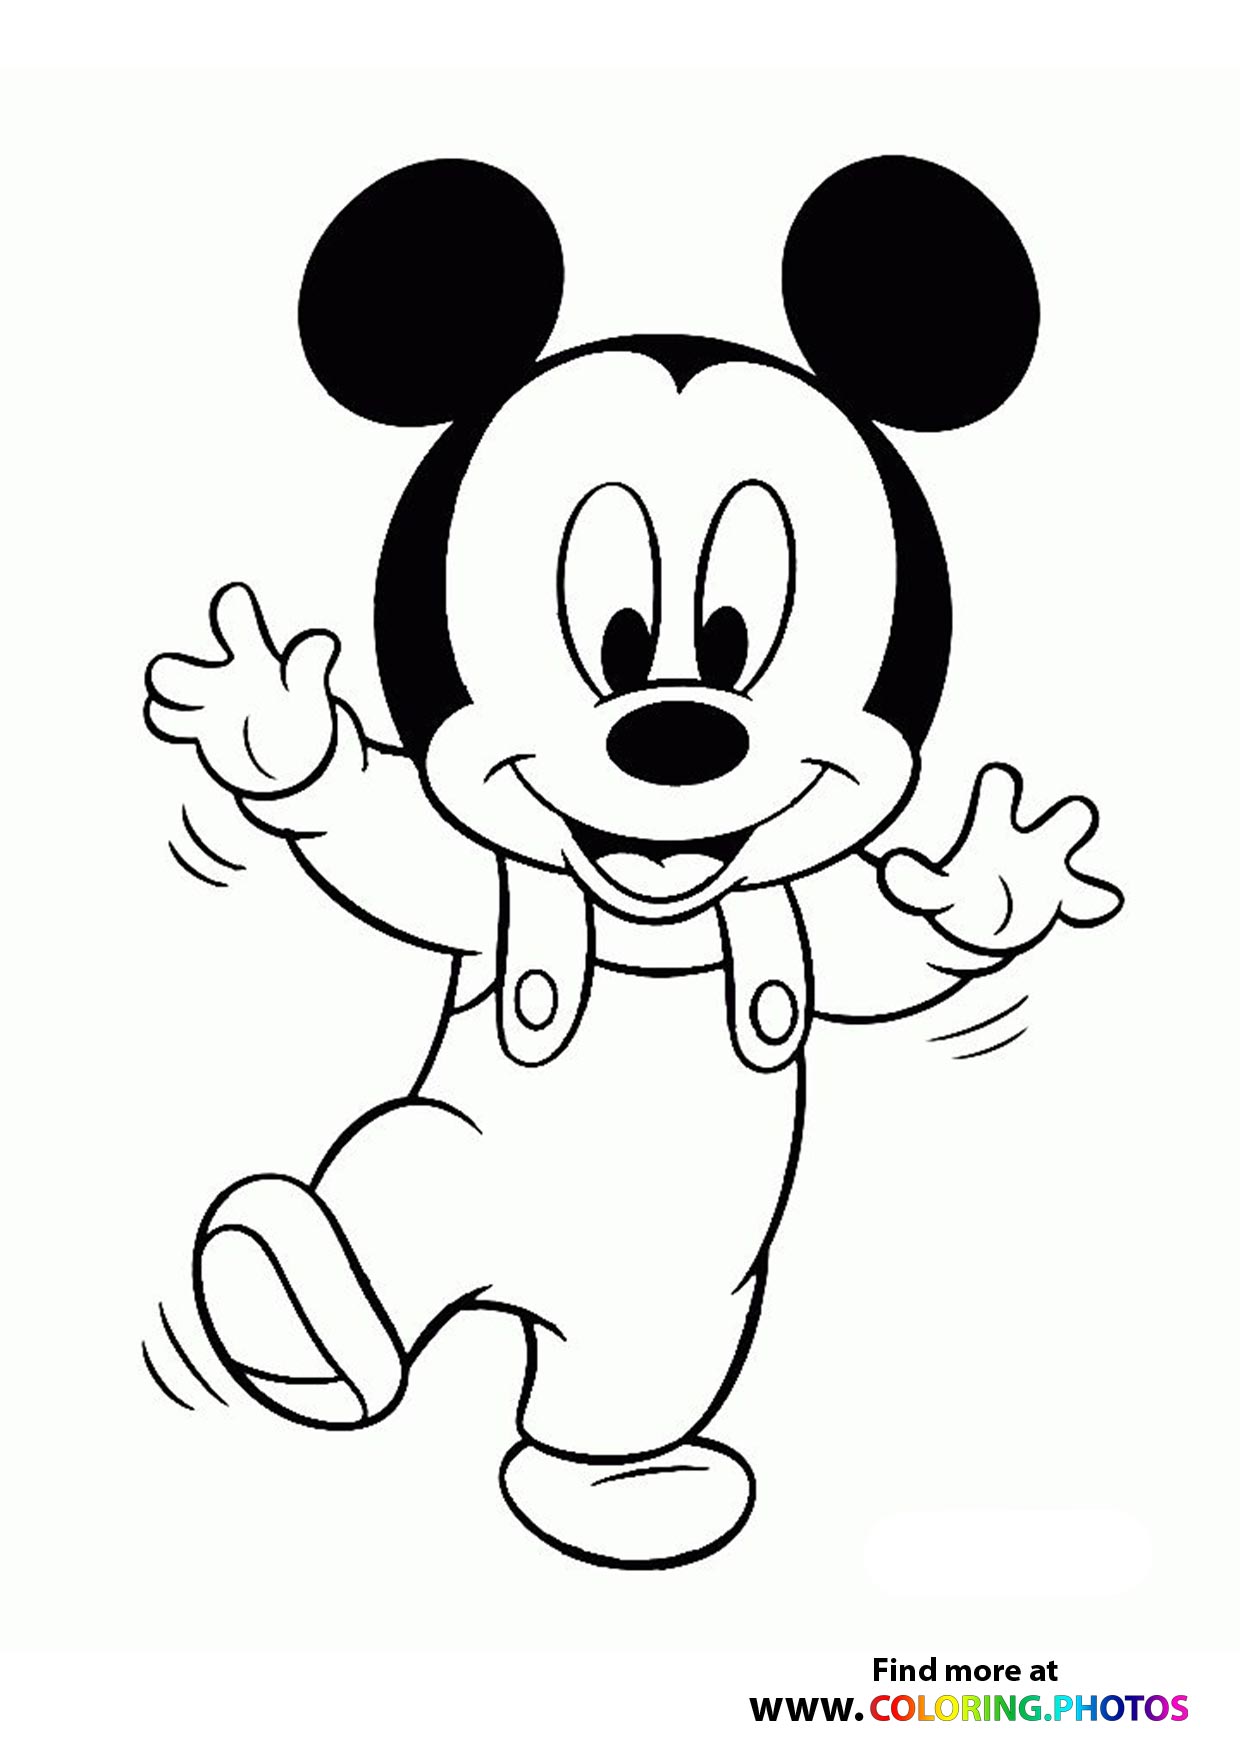 mickey-mouse-coloring-pages-for-kids-free-and-easy-print-or-download